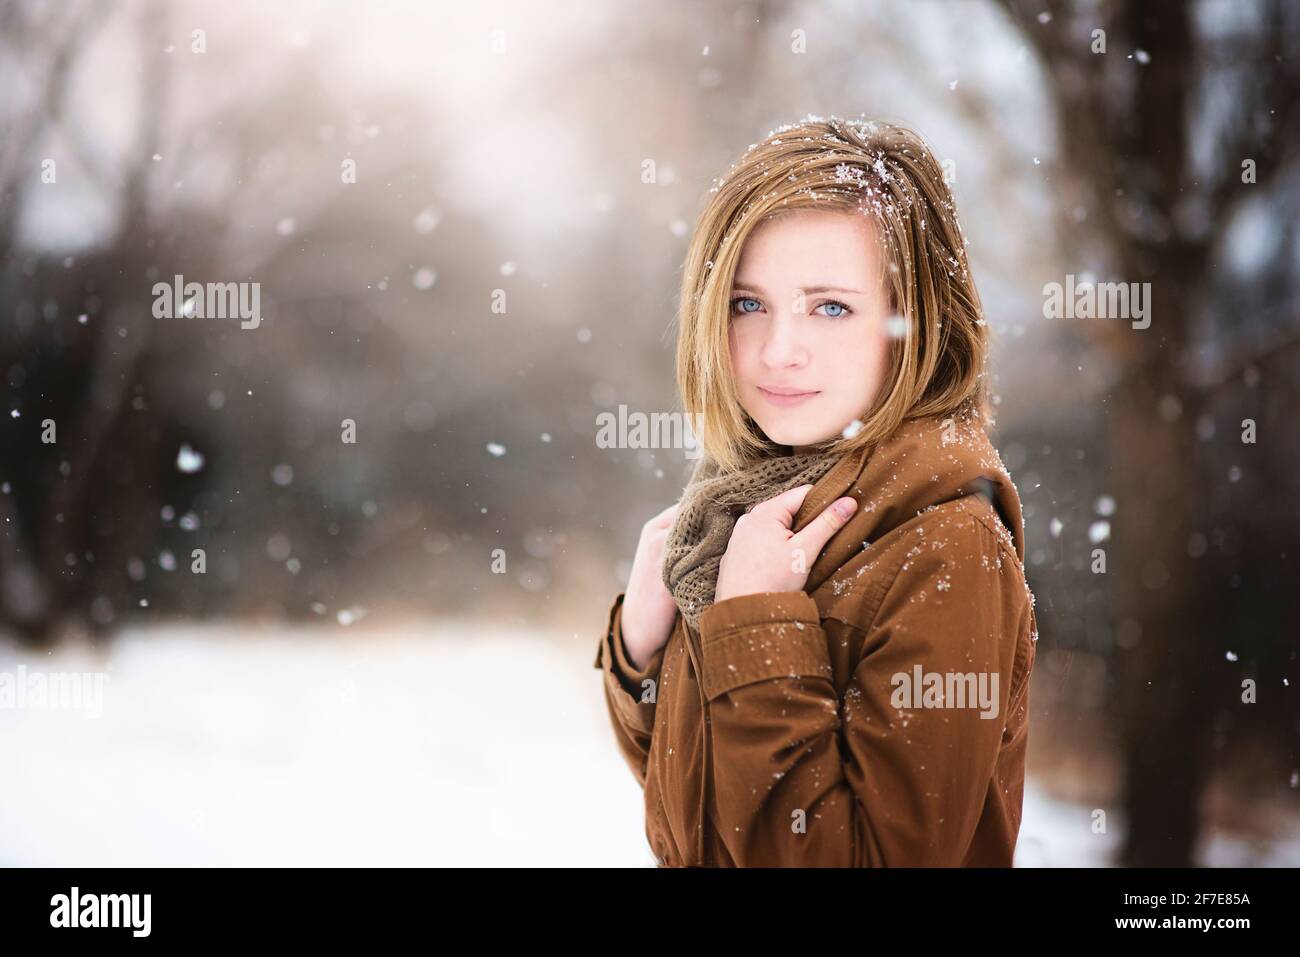 Beautiful blond teen girl outdoors in the snow, gazing at viewer. Stock Photo